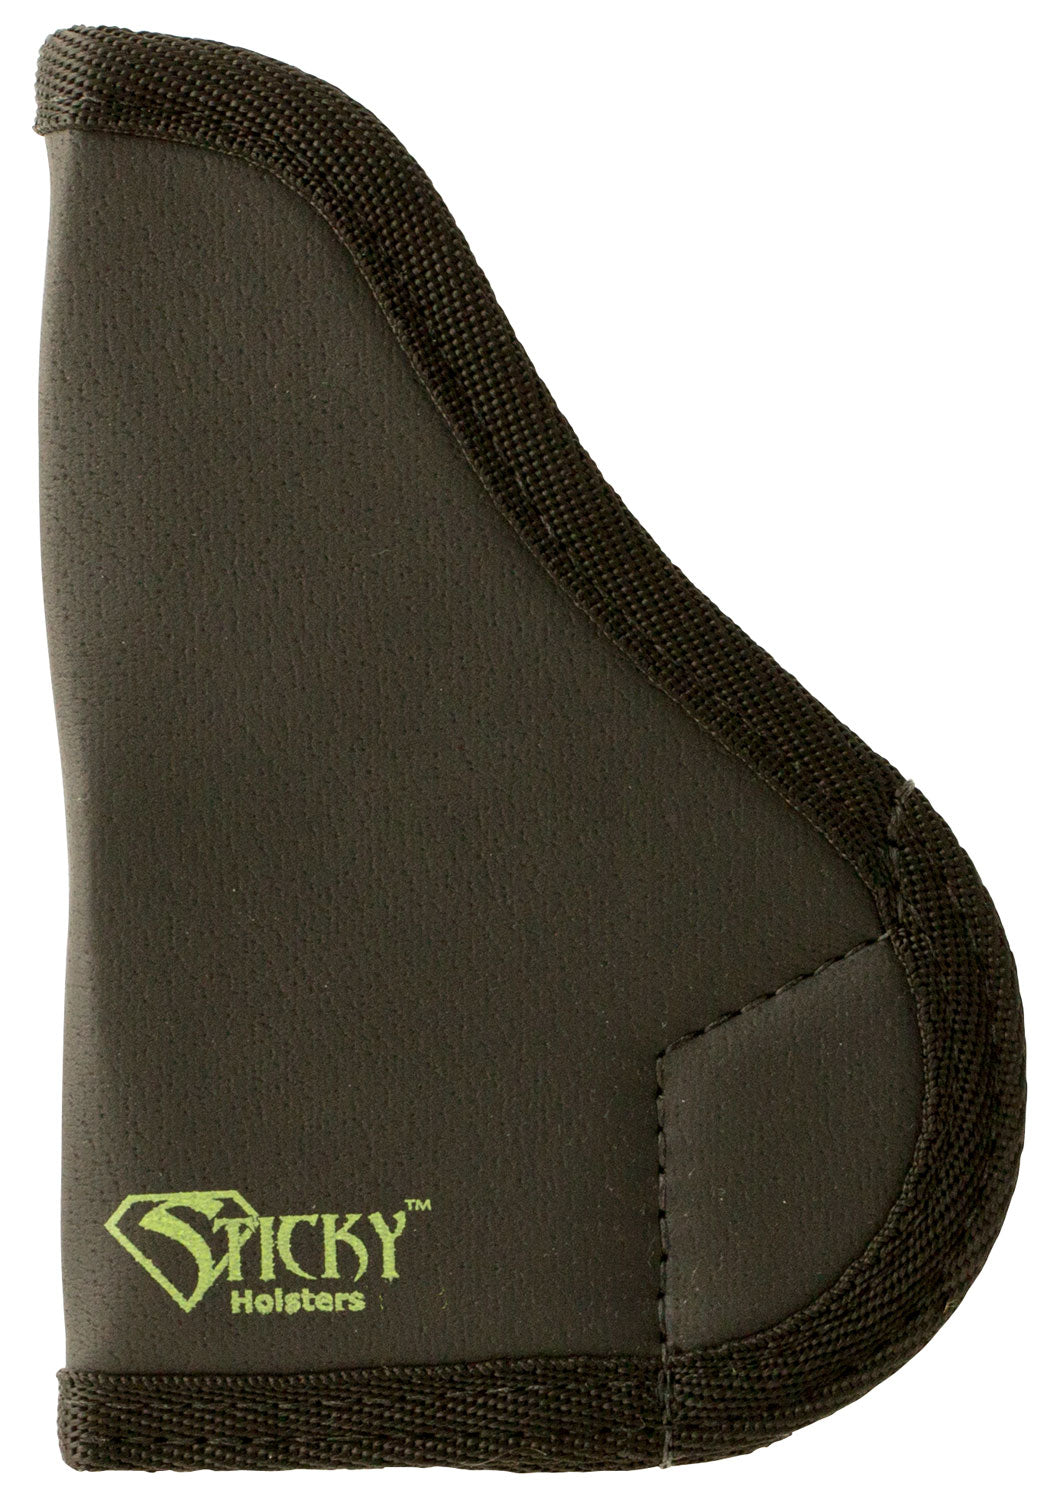 Sticky Holsters LG6S LG-6S Compact/Med Auto Latex Free Synthetic Rubber Black w/Green Logo